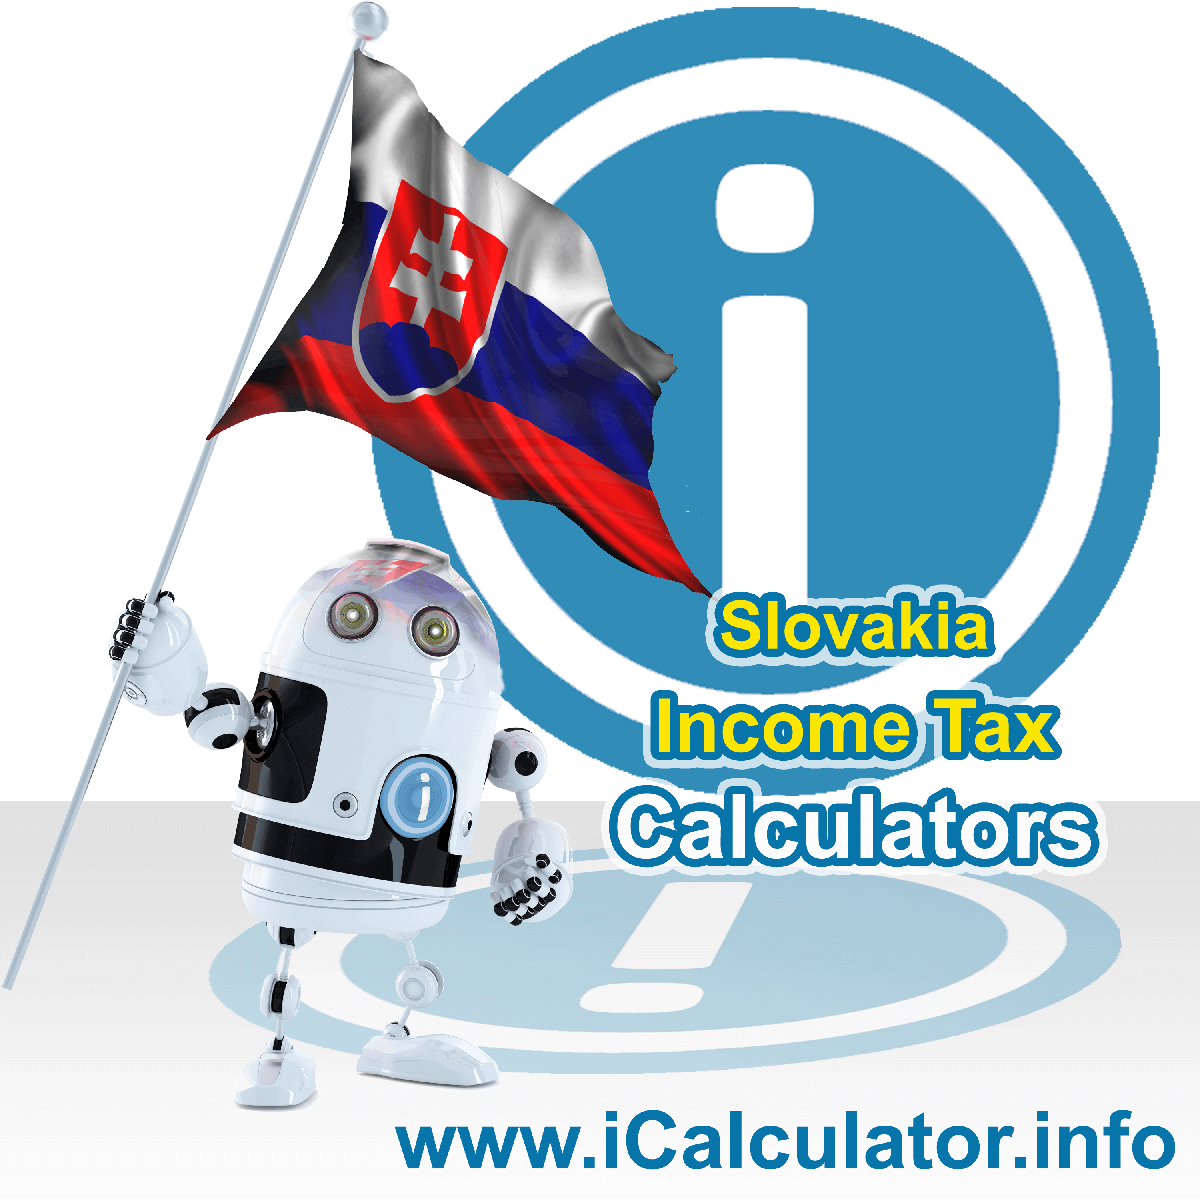 Slovakia Income Tax Calculator. This image shows a new employer in Slovakia calculating the annual payroll costs based on multiple payroll payments in one year in Slovakia using the Slovakia income tax calculator to understand their payroll costs in Slovakia in 2022